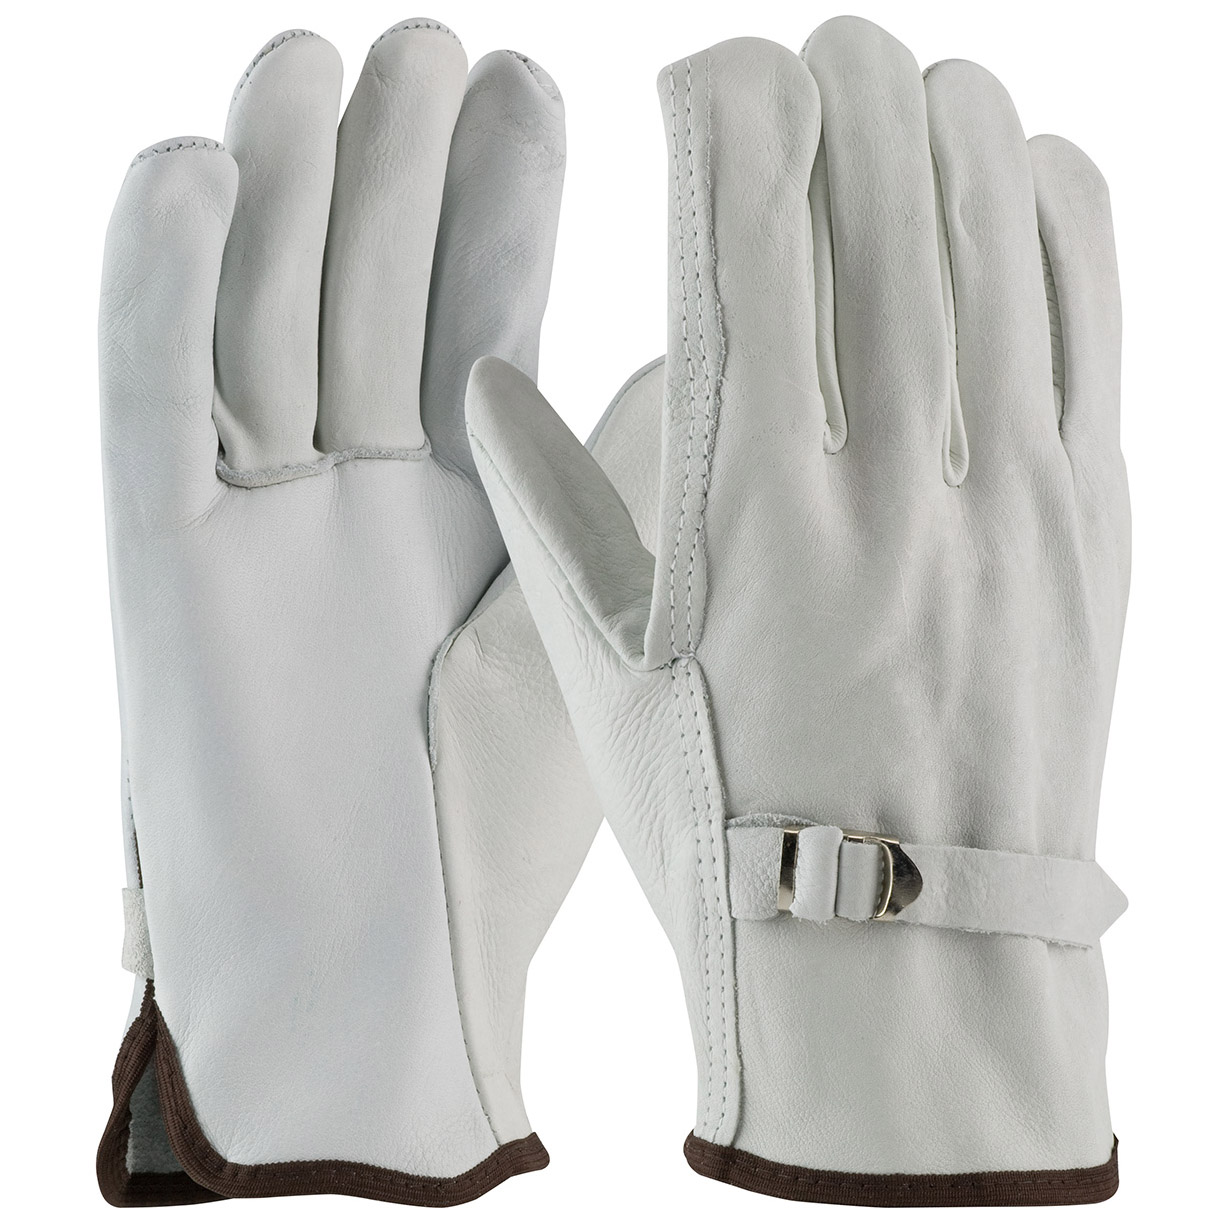 PIP® 68-158 Superior Grade General Purpose Gloves, Drivers, Top Grain Cowhide Leather Palm, Top Grain Cowhide Leather, Natural, Slip-On Cuff, Uncoated Coating, Resists: Abrasion, Unlined Lining, Straight Thumb